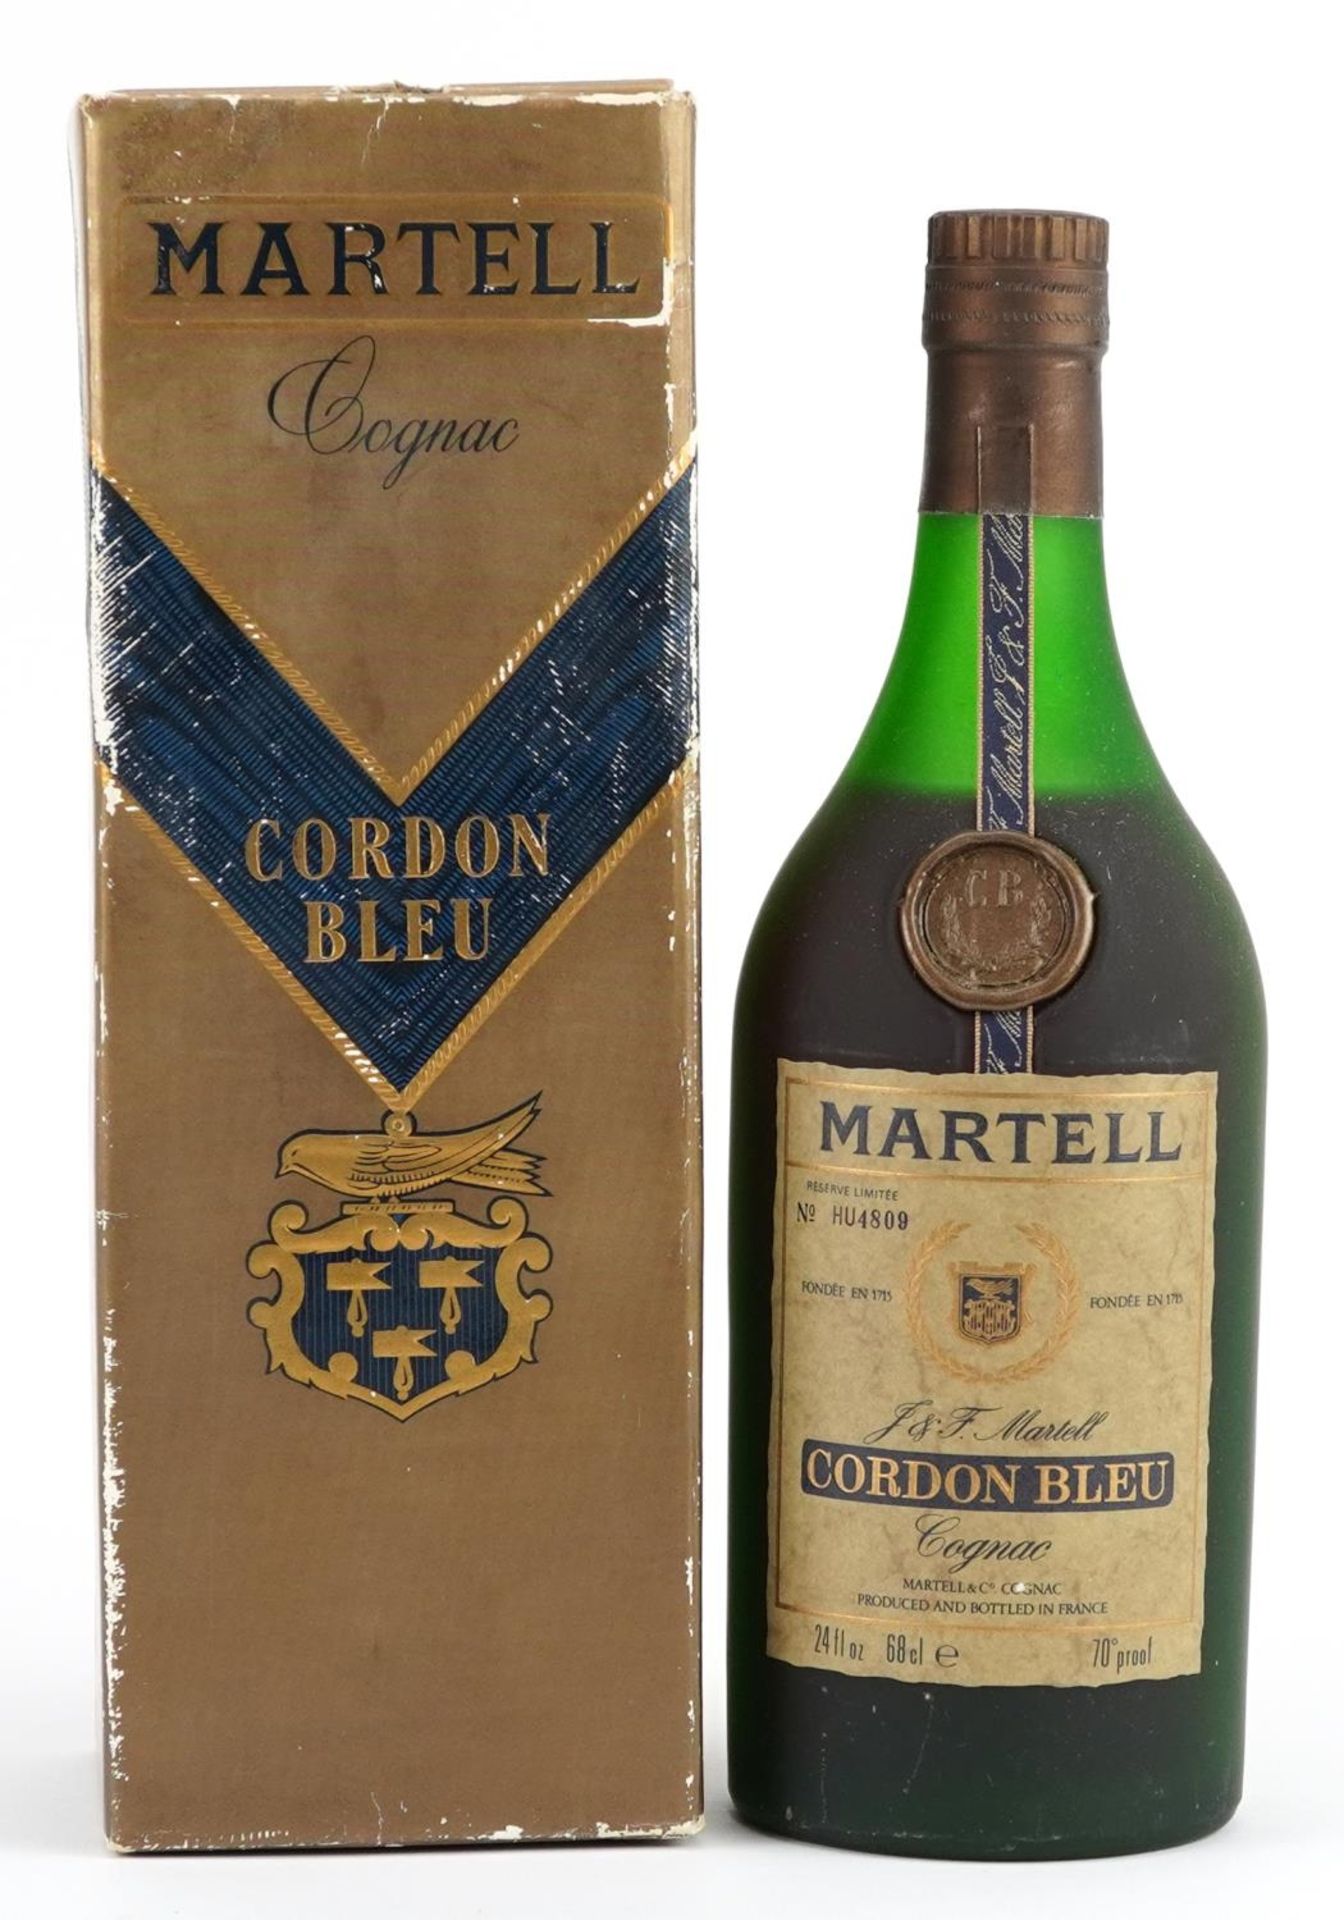 Bottle of Martell Cordon Bleu cognac with box : For further information on this lot please visit